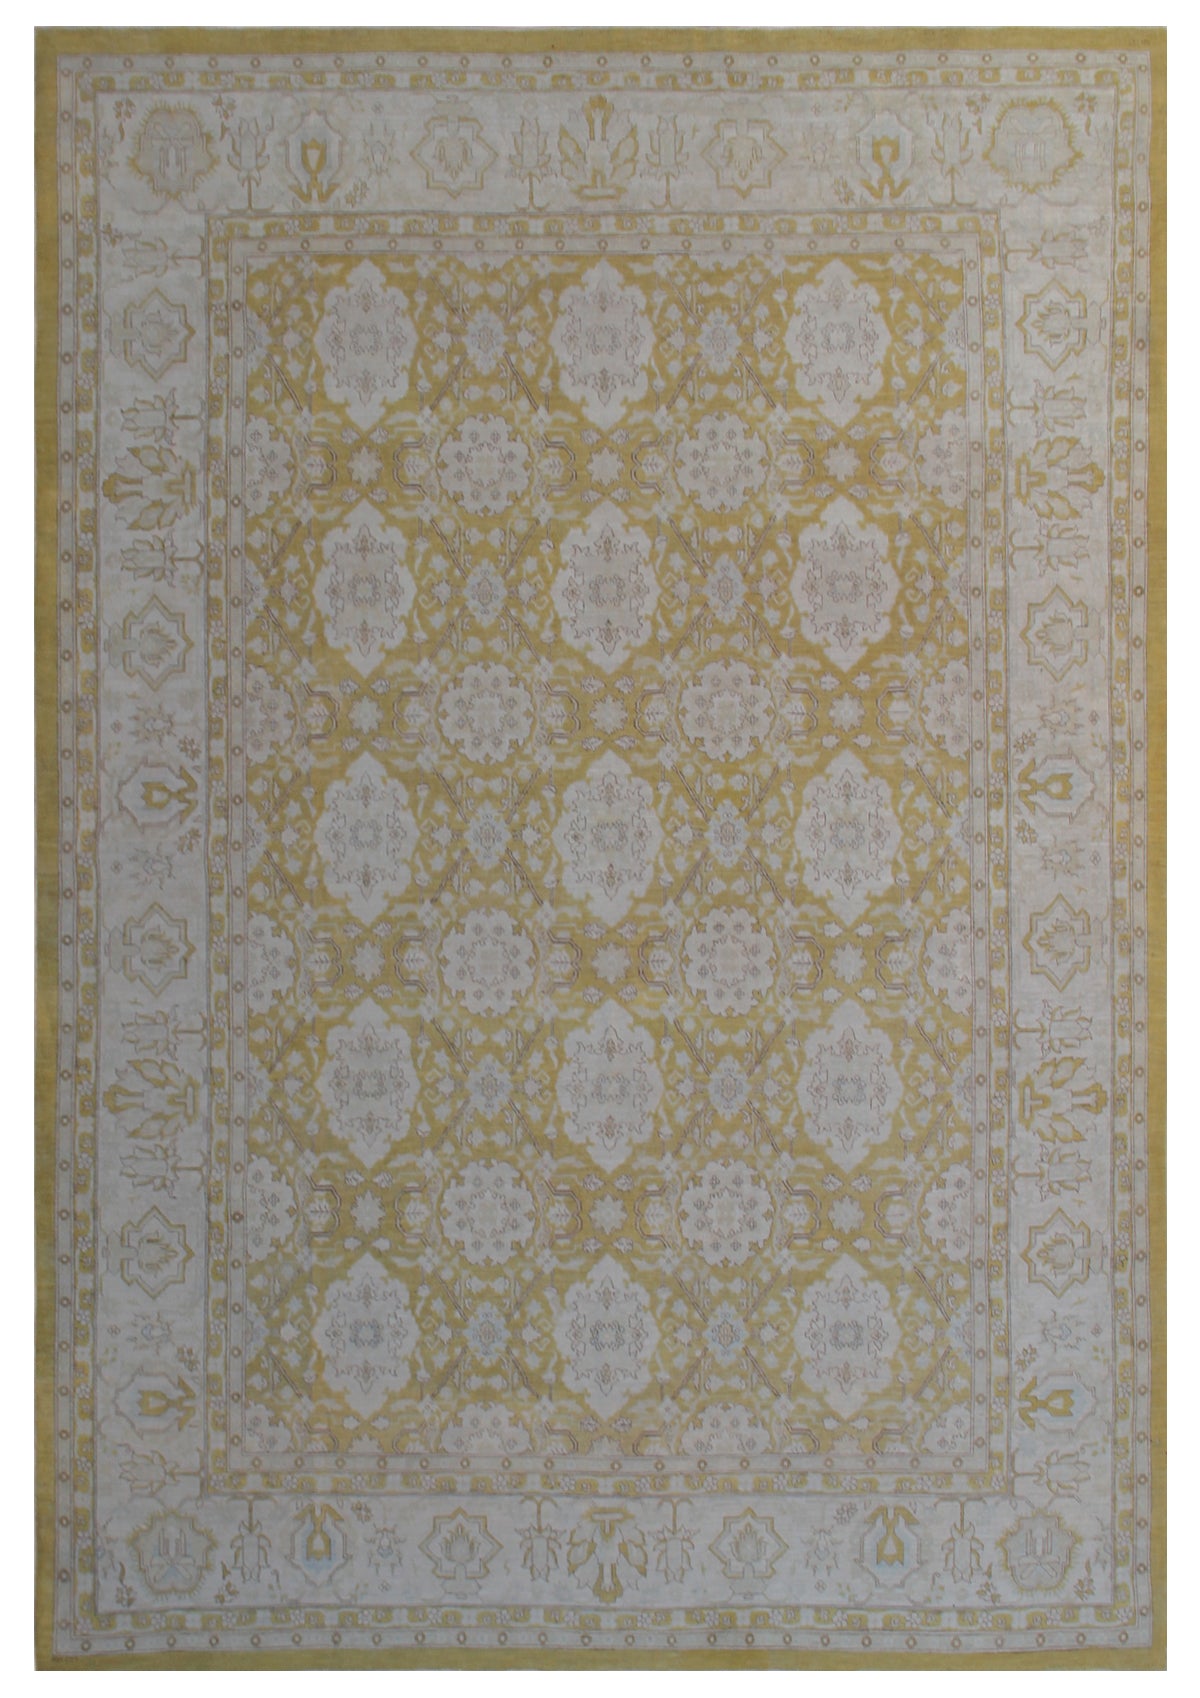 9'x12 Gold Agra 505 Design Ariana Traditional Rug